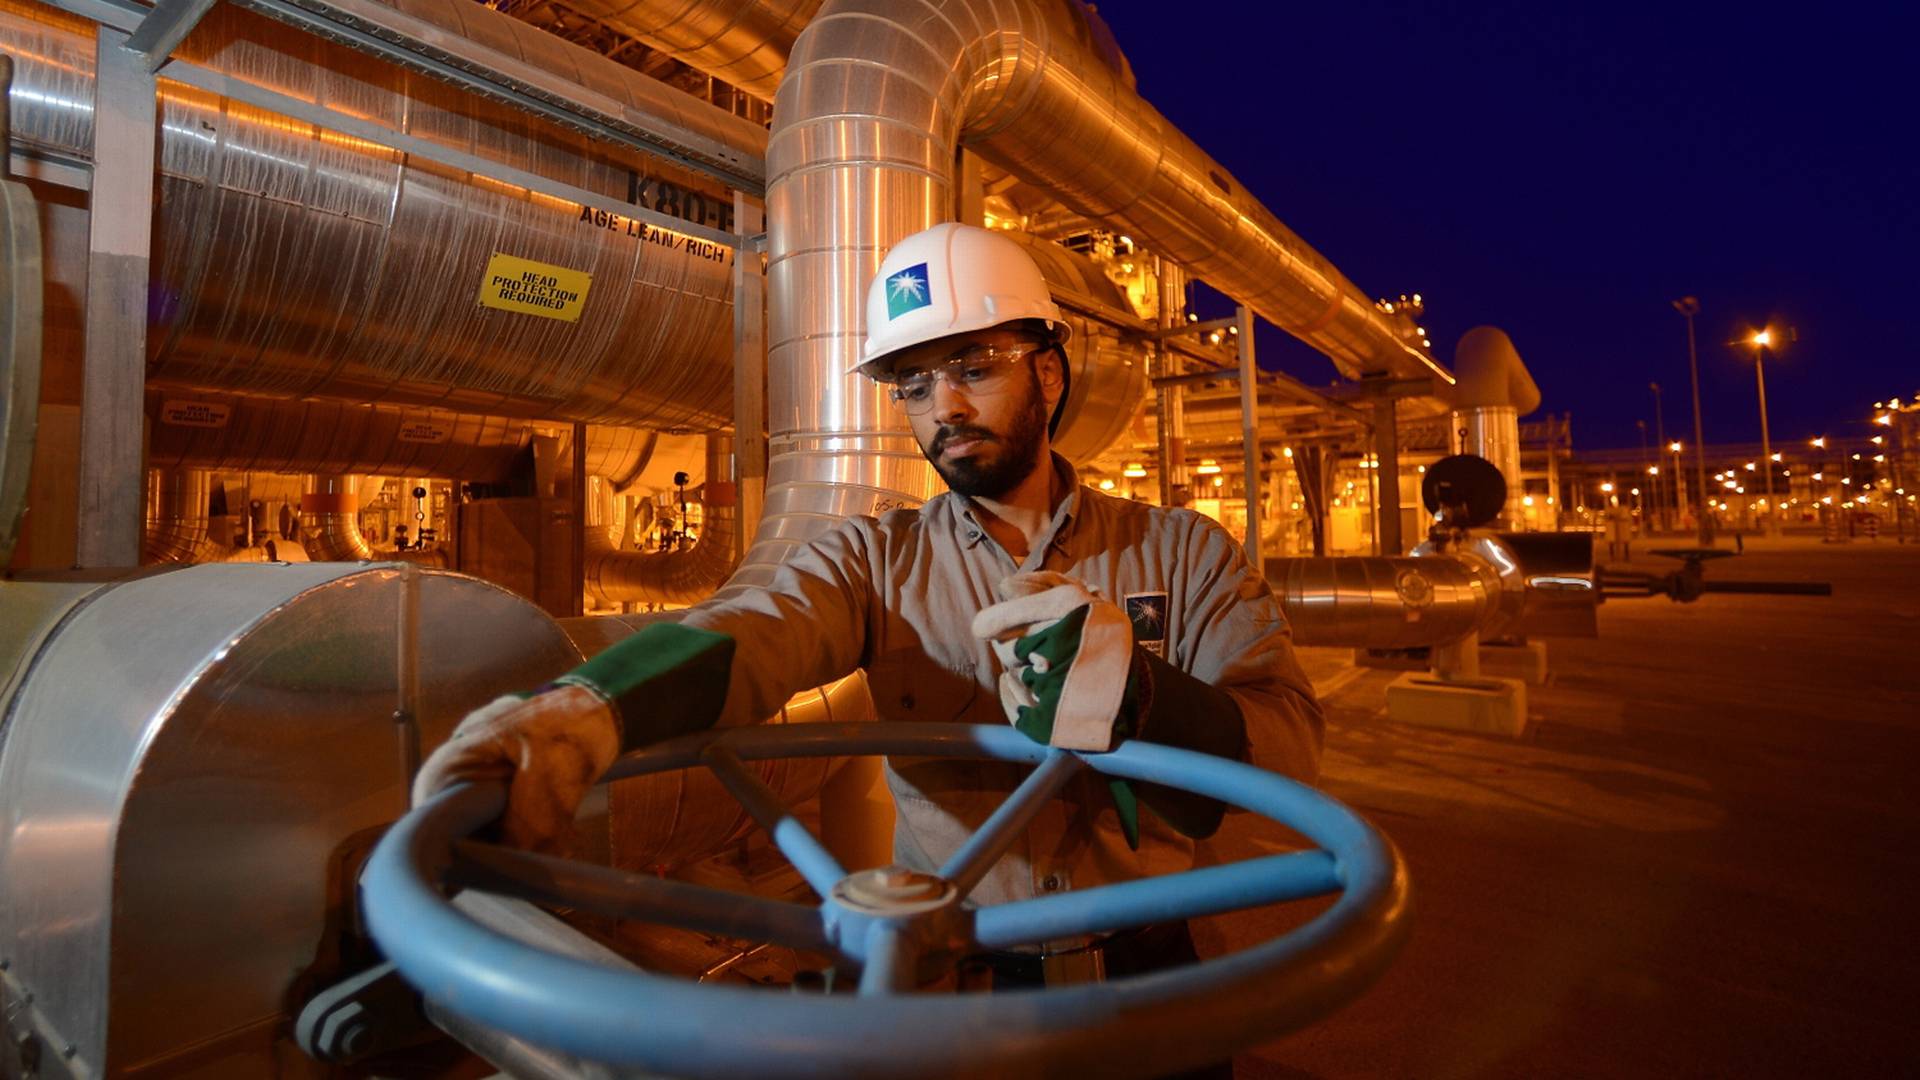 Saudi Arabia Cuts Oil Prices to Asia to competewith Iran